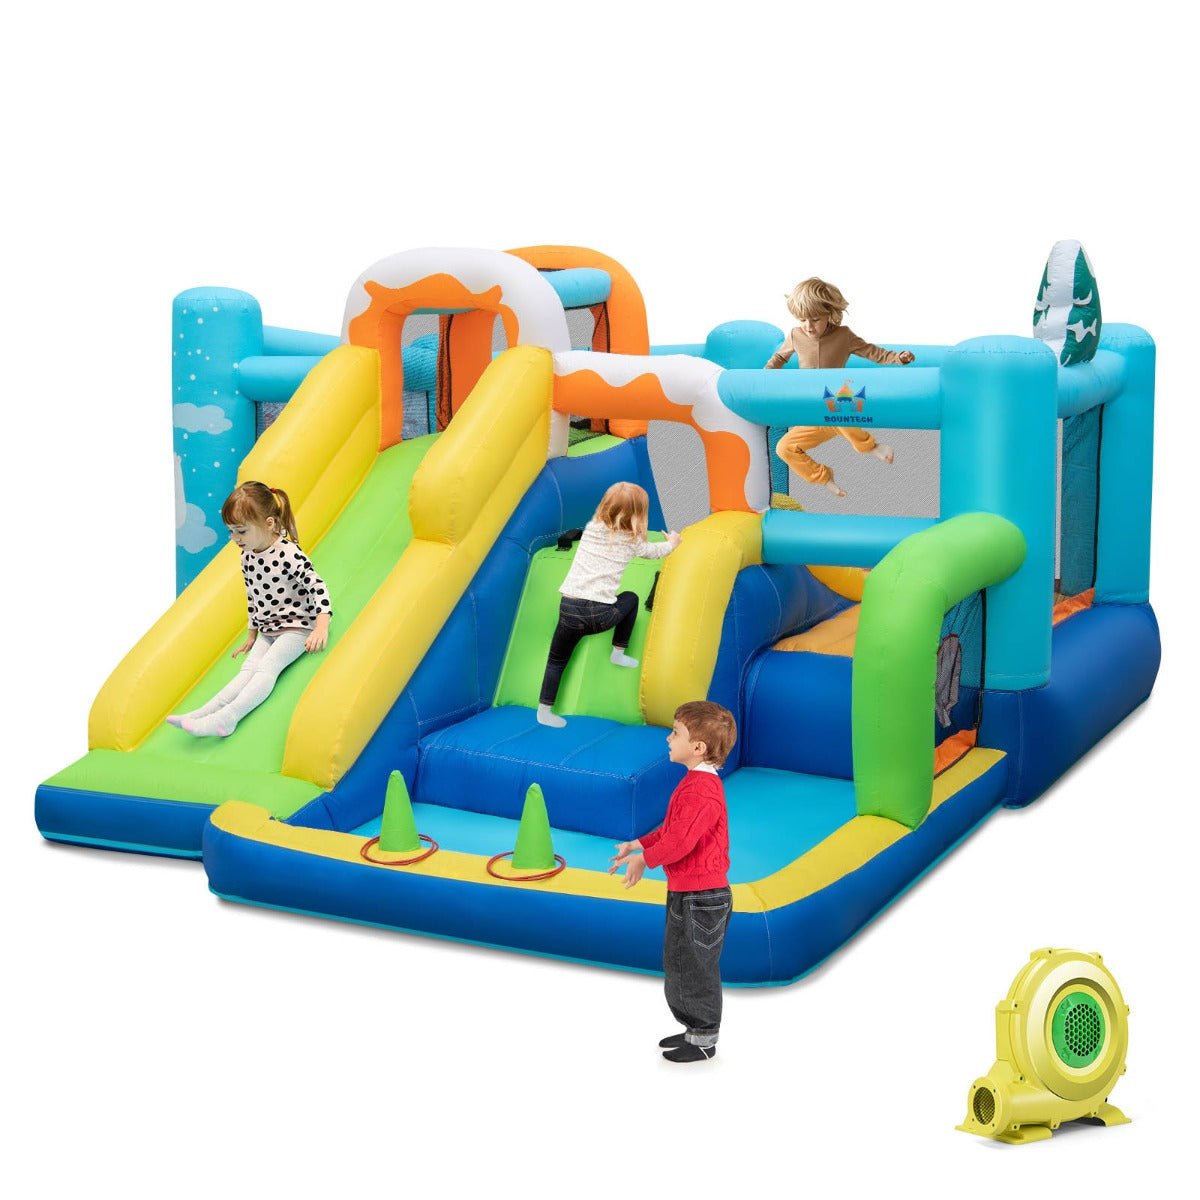 Frosty Fun Bounce House with Slide